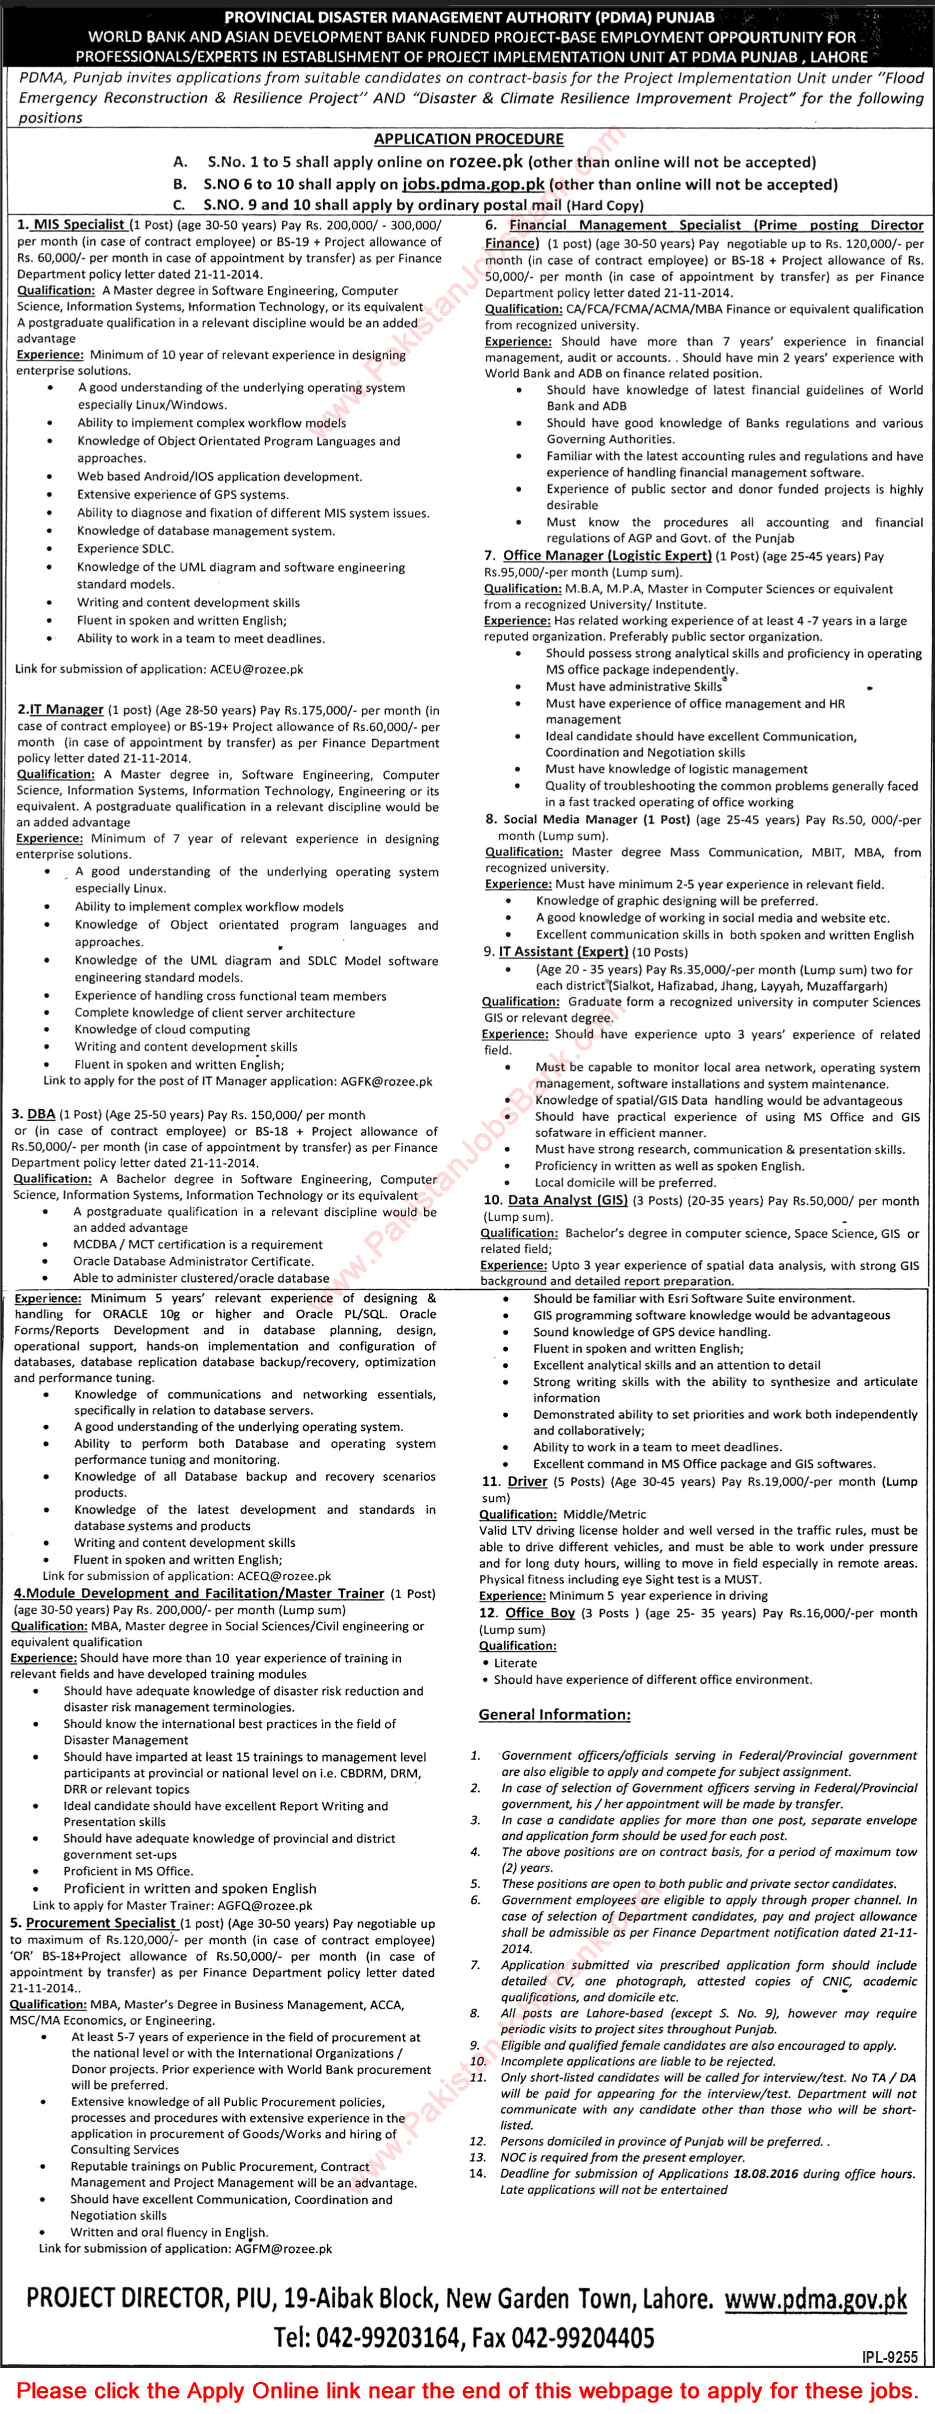 PDMA Punjab Jobs 2016 August Apply Online IT Assistants, Data Analysts, Drivers, Office Boys & Others Latest